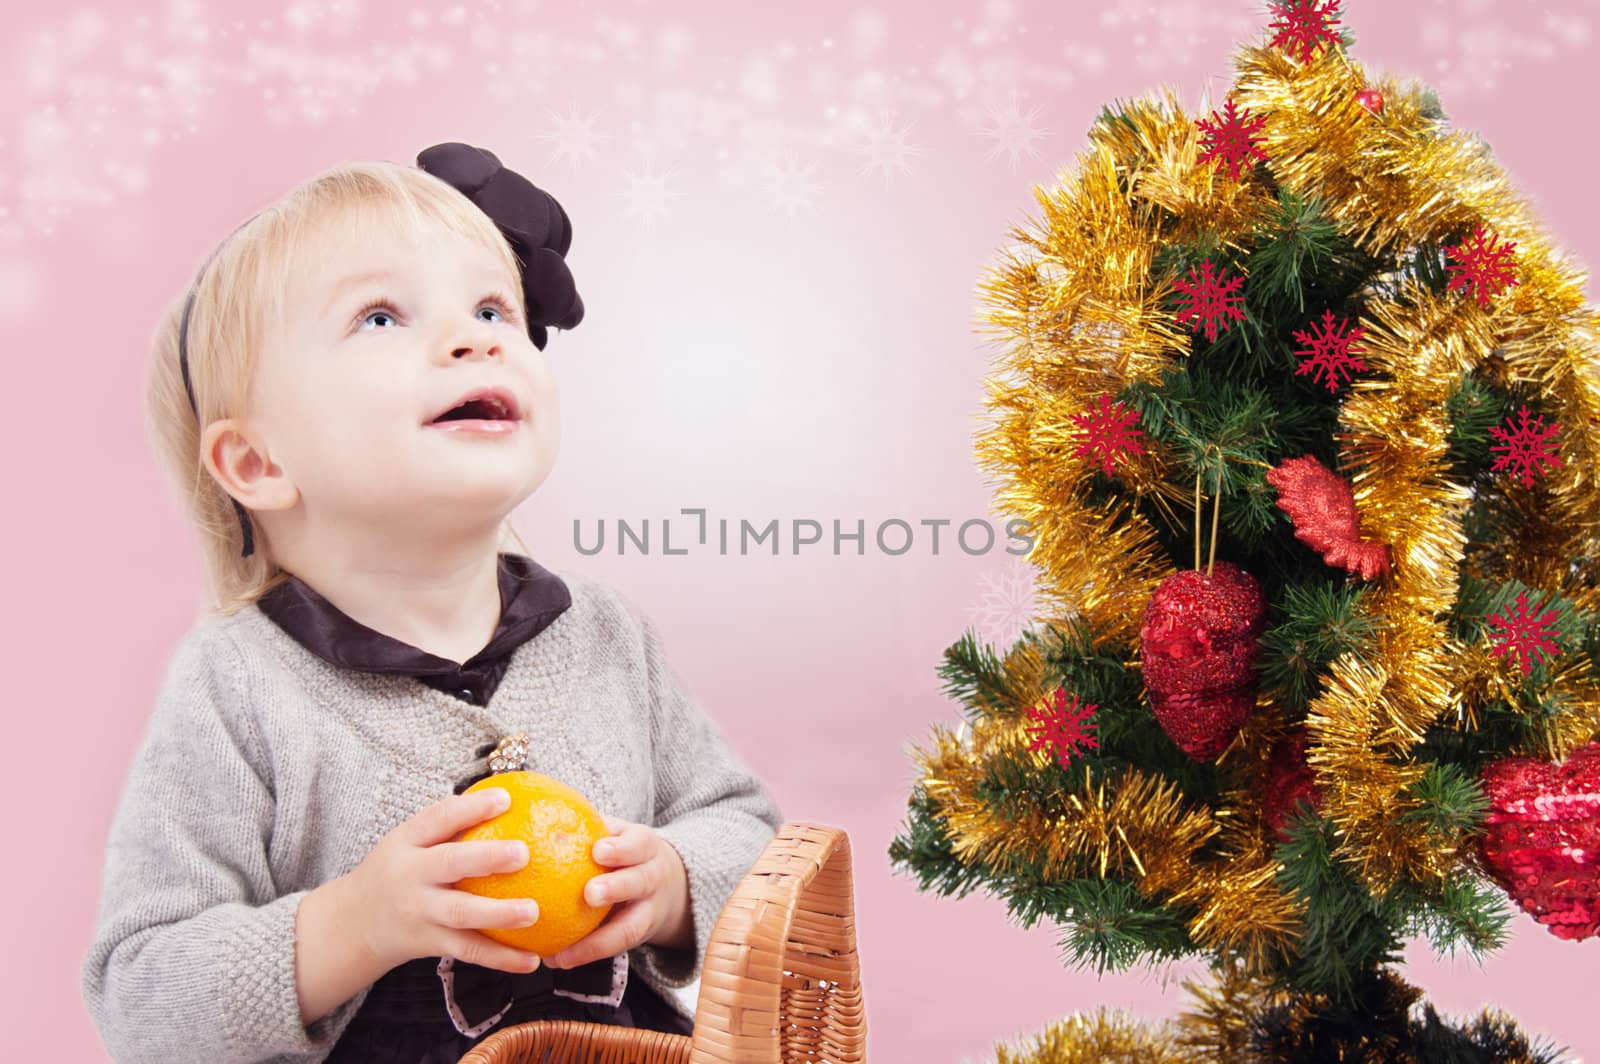 Surprised little girl looking up under Christmas tree